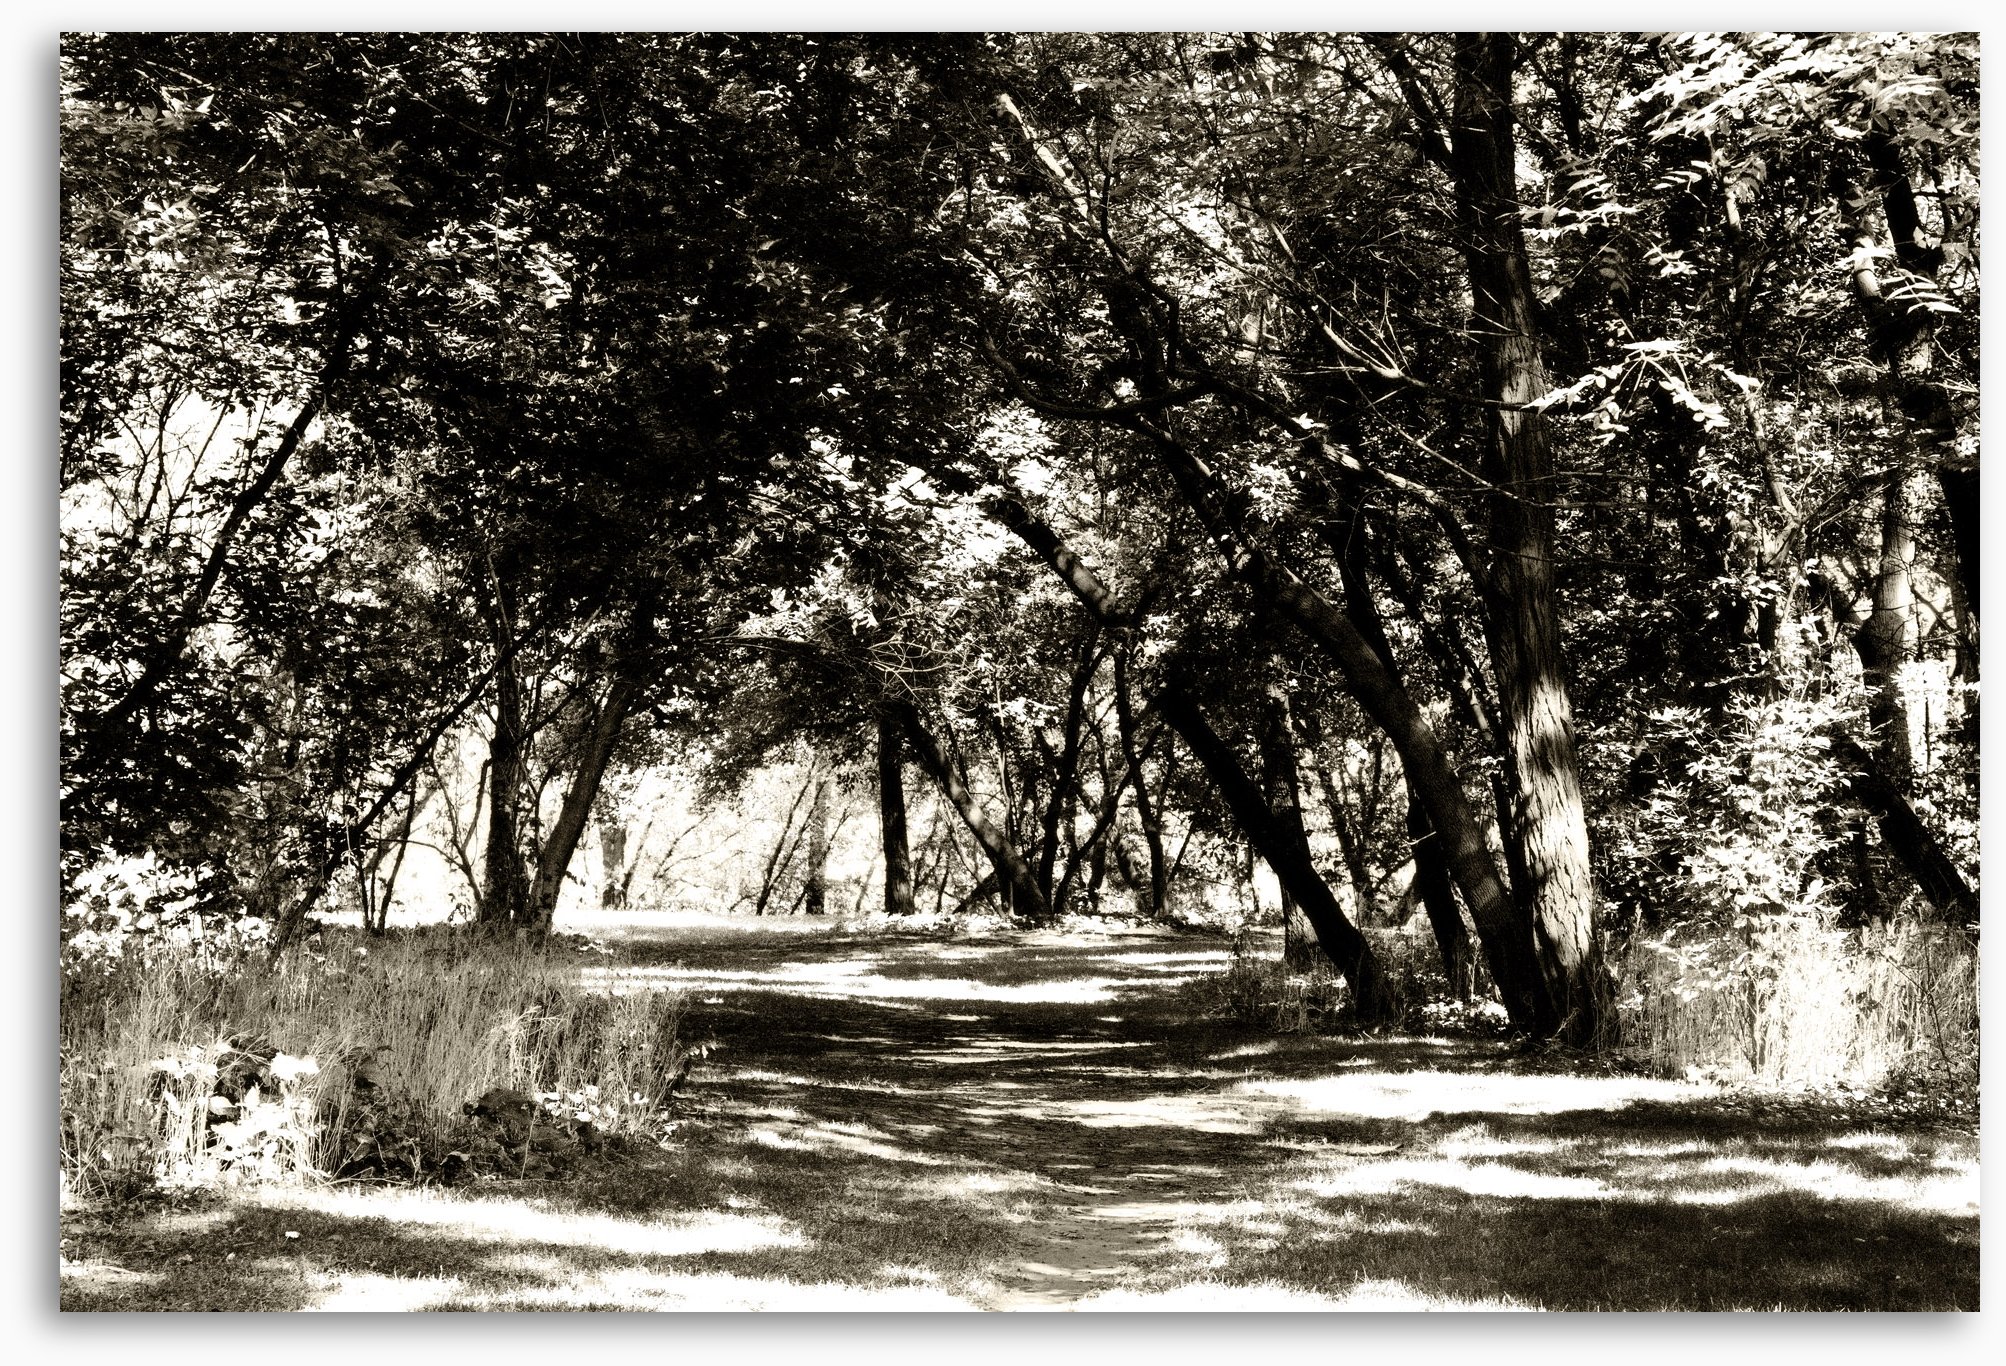 black and white image of an old dirt road through the woods